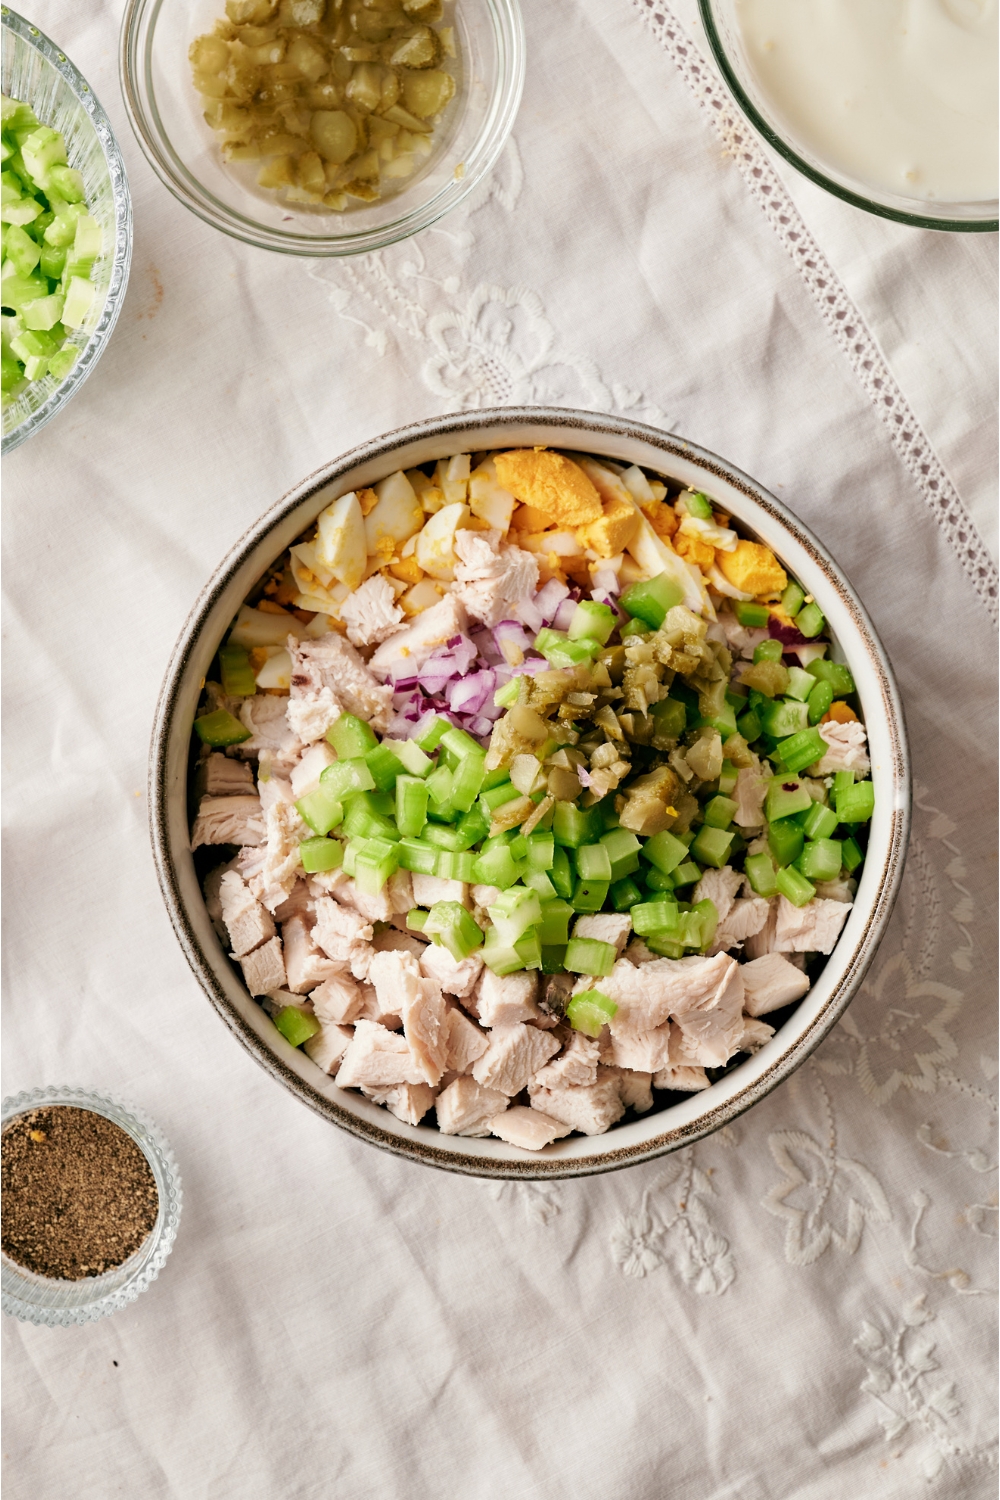 A bowl filled with cubed chicken, diced celery, pickles, red onion, and chopped hard boiled eggs next to smaller bowls of black pepper and chopped pickles.